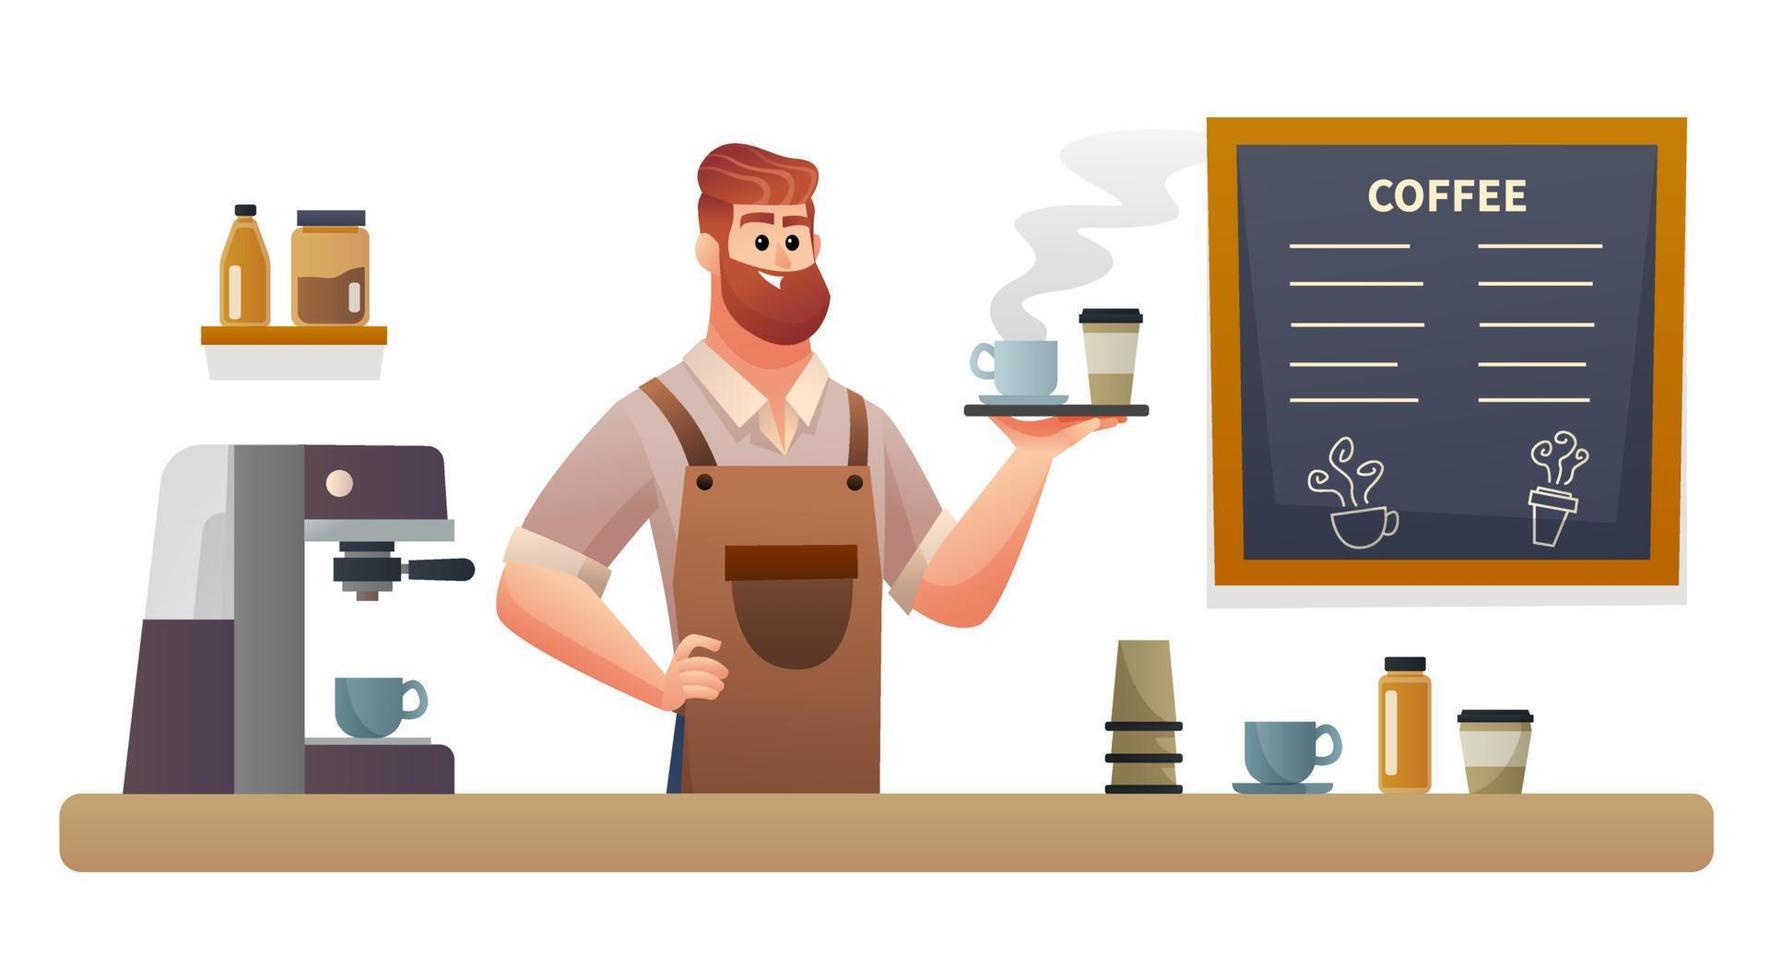 Barista carrying coffee with tray at coffee shop counter illustration vector